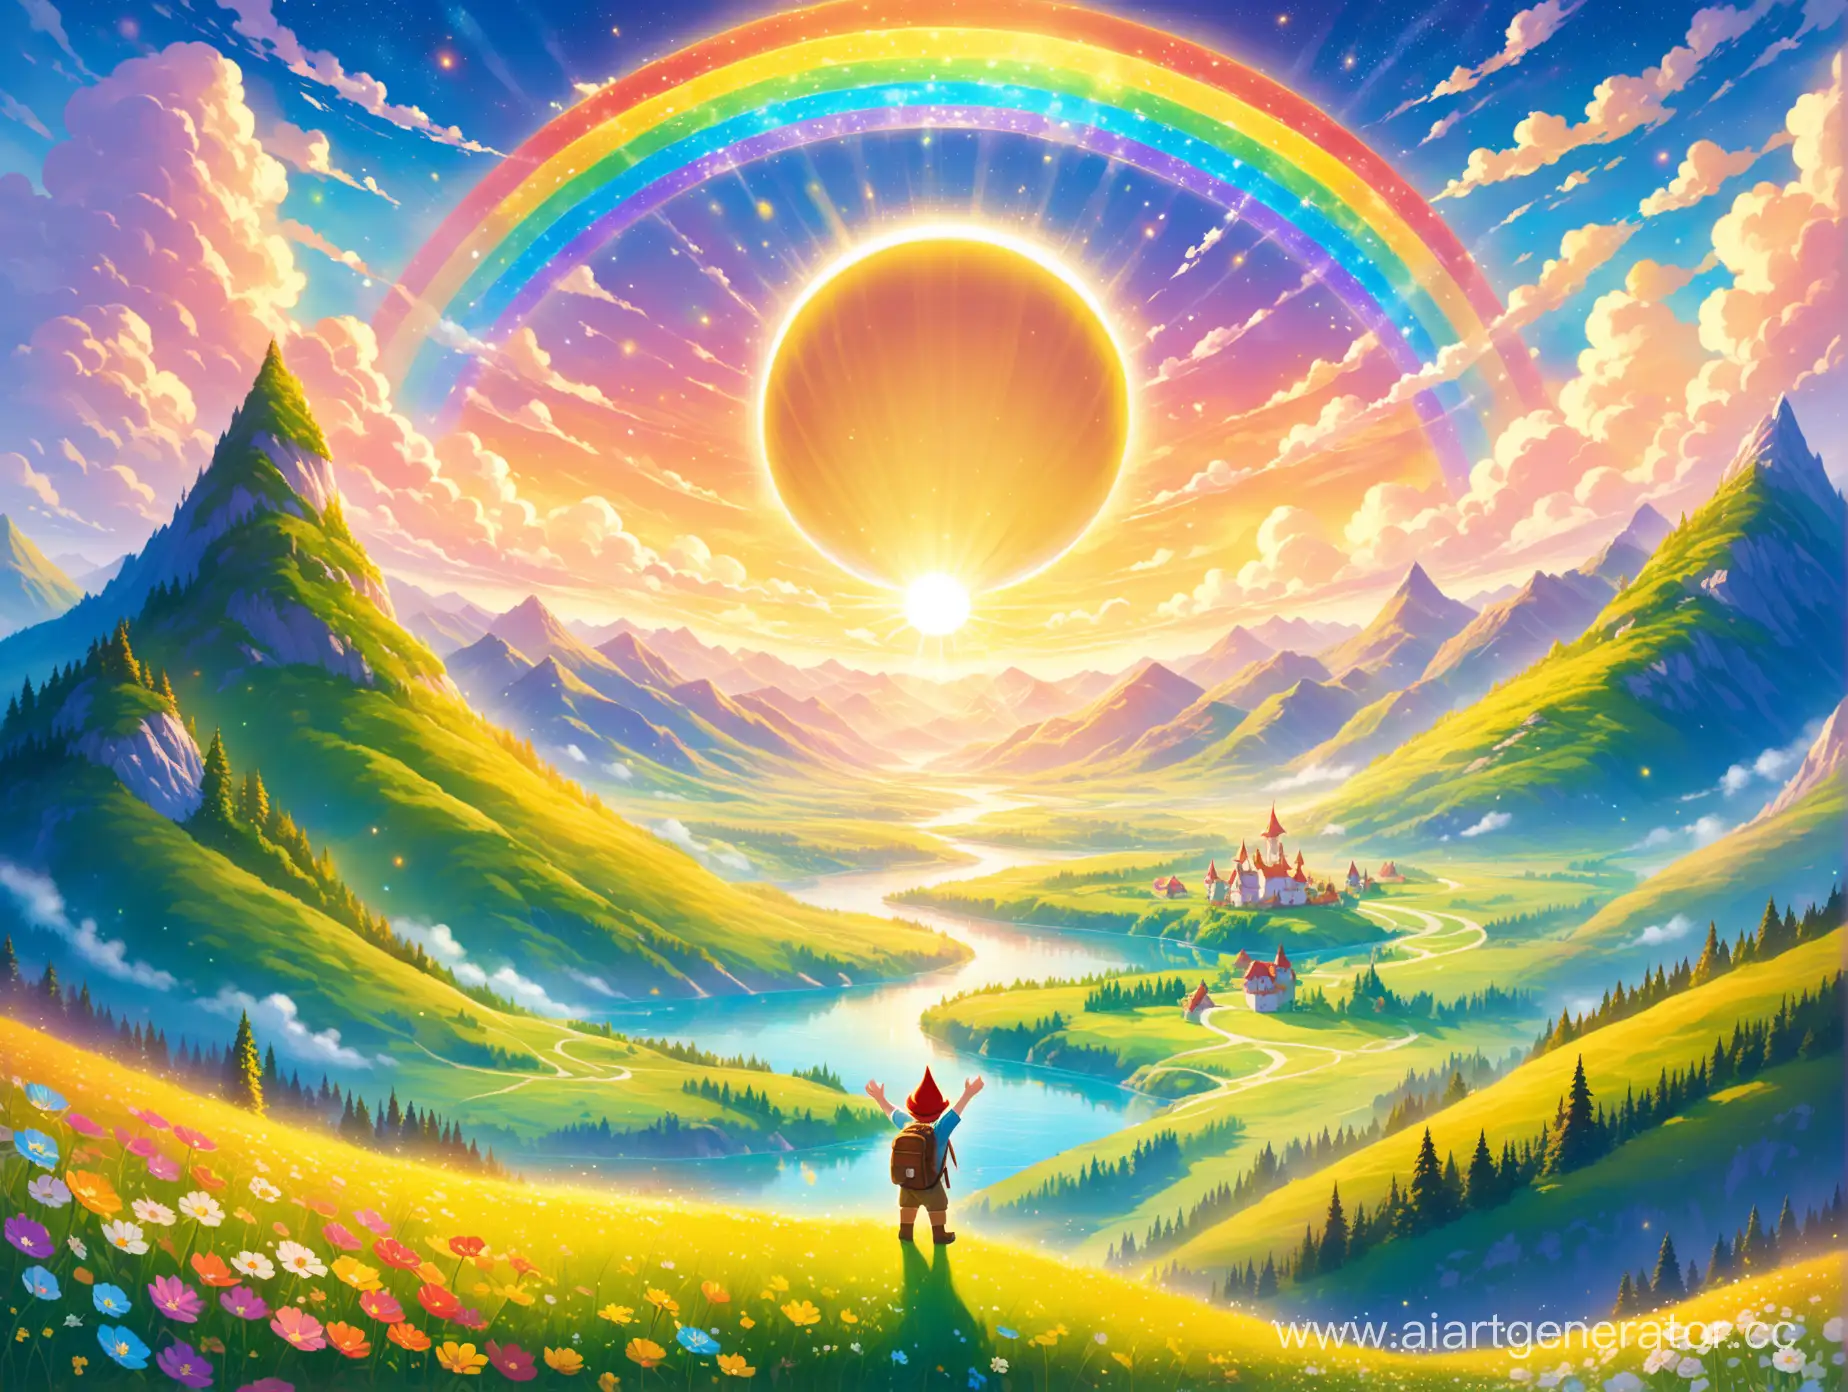 Curious-Boy-Vzhik-in-a-Magical-Landscape-with-Rainbow-Clouds-and-Dancing-Creatures